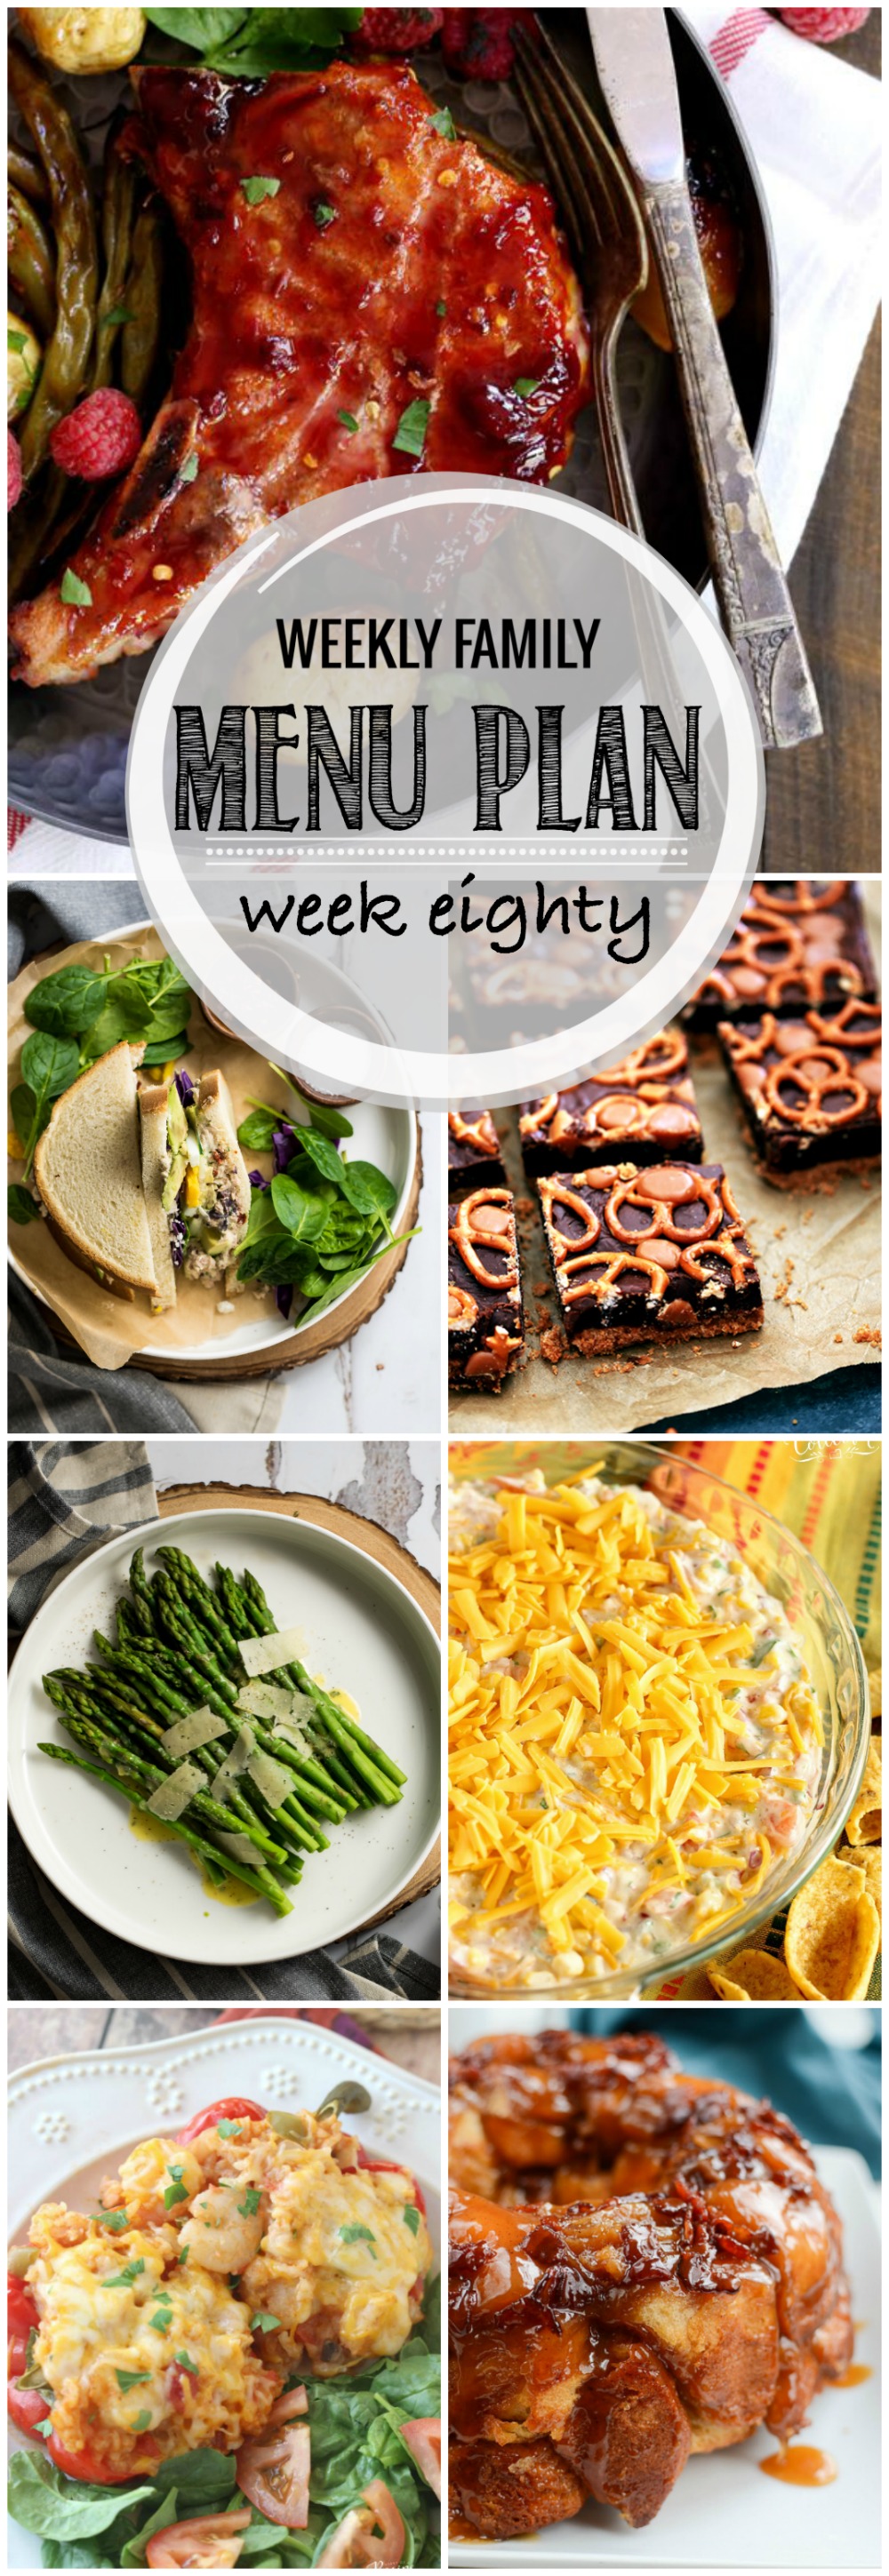 Weekly Family Menu Plan - Week Eighty is brought to you by a group of food bloggers who love to plan ahead! A weekly edition of thoughtfully prepared recipes is rounded up to get you through those busy weeks! | www.cookingandbeer.com